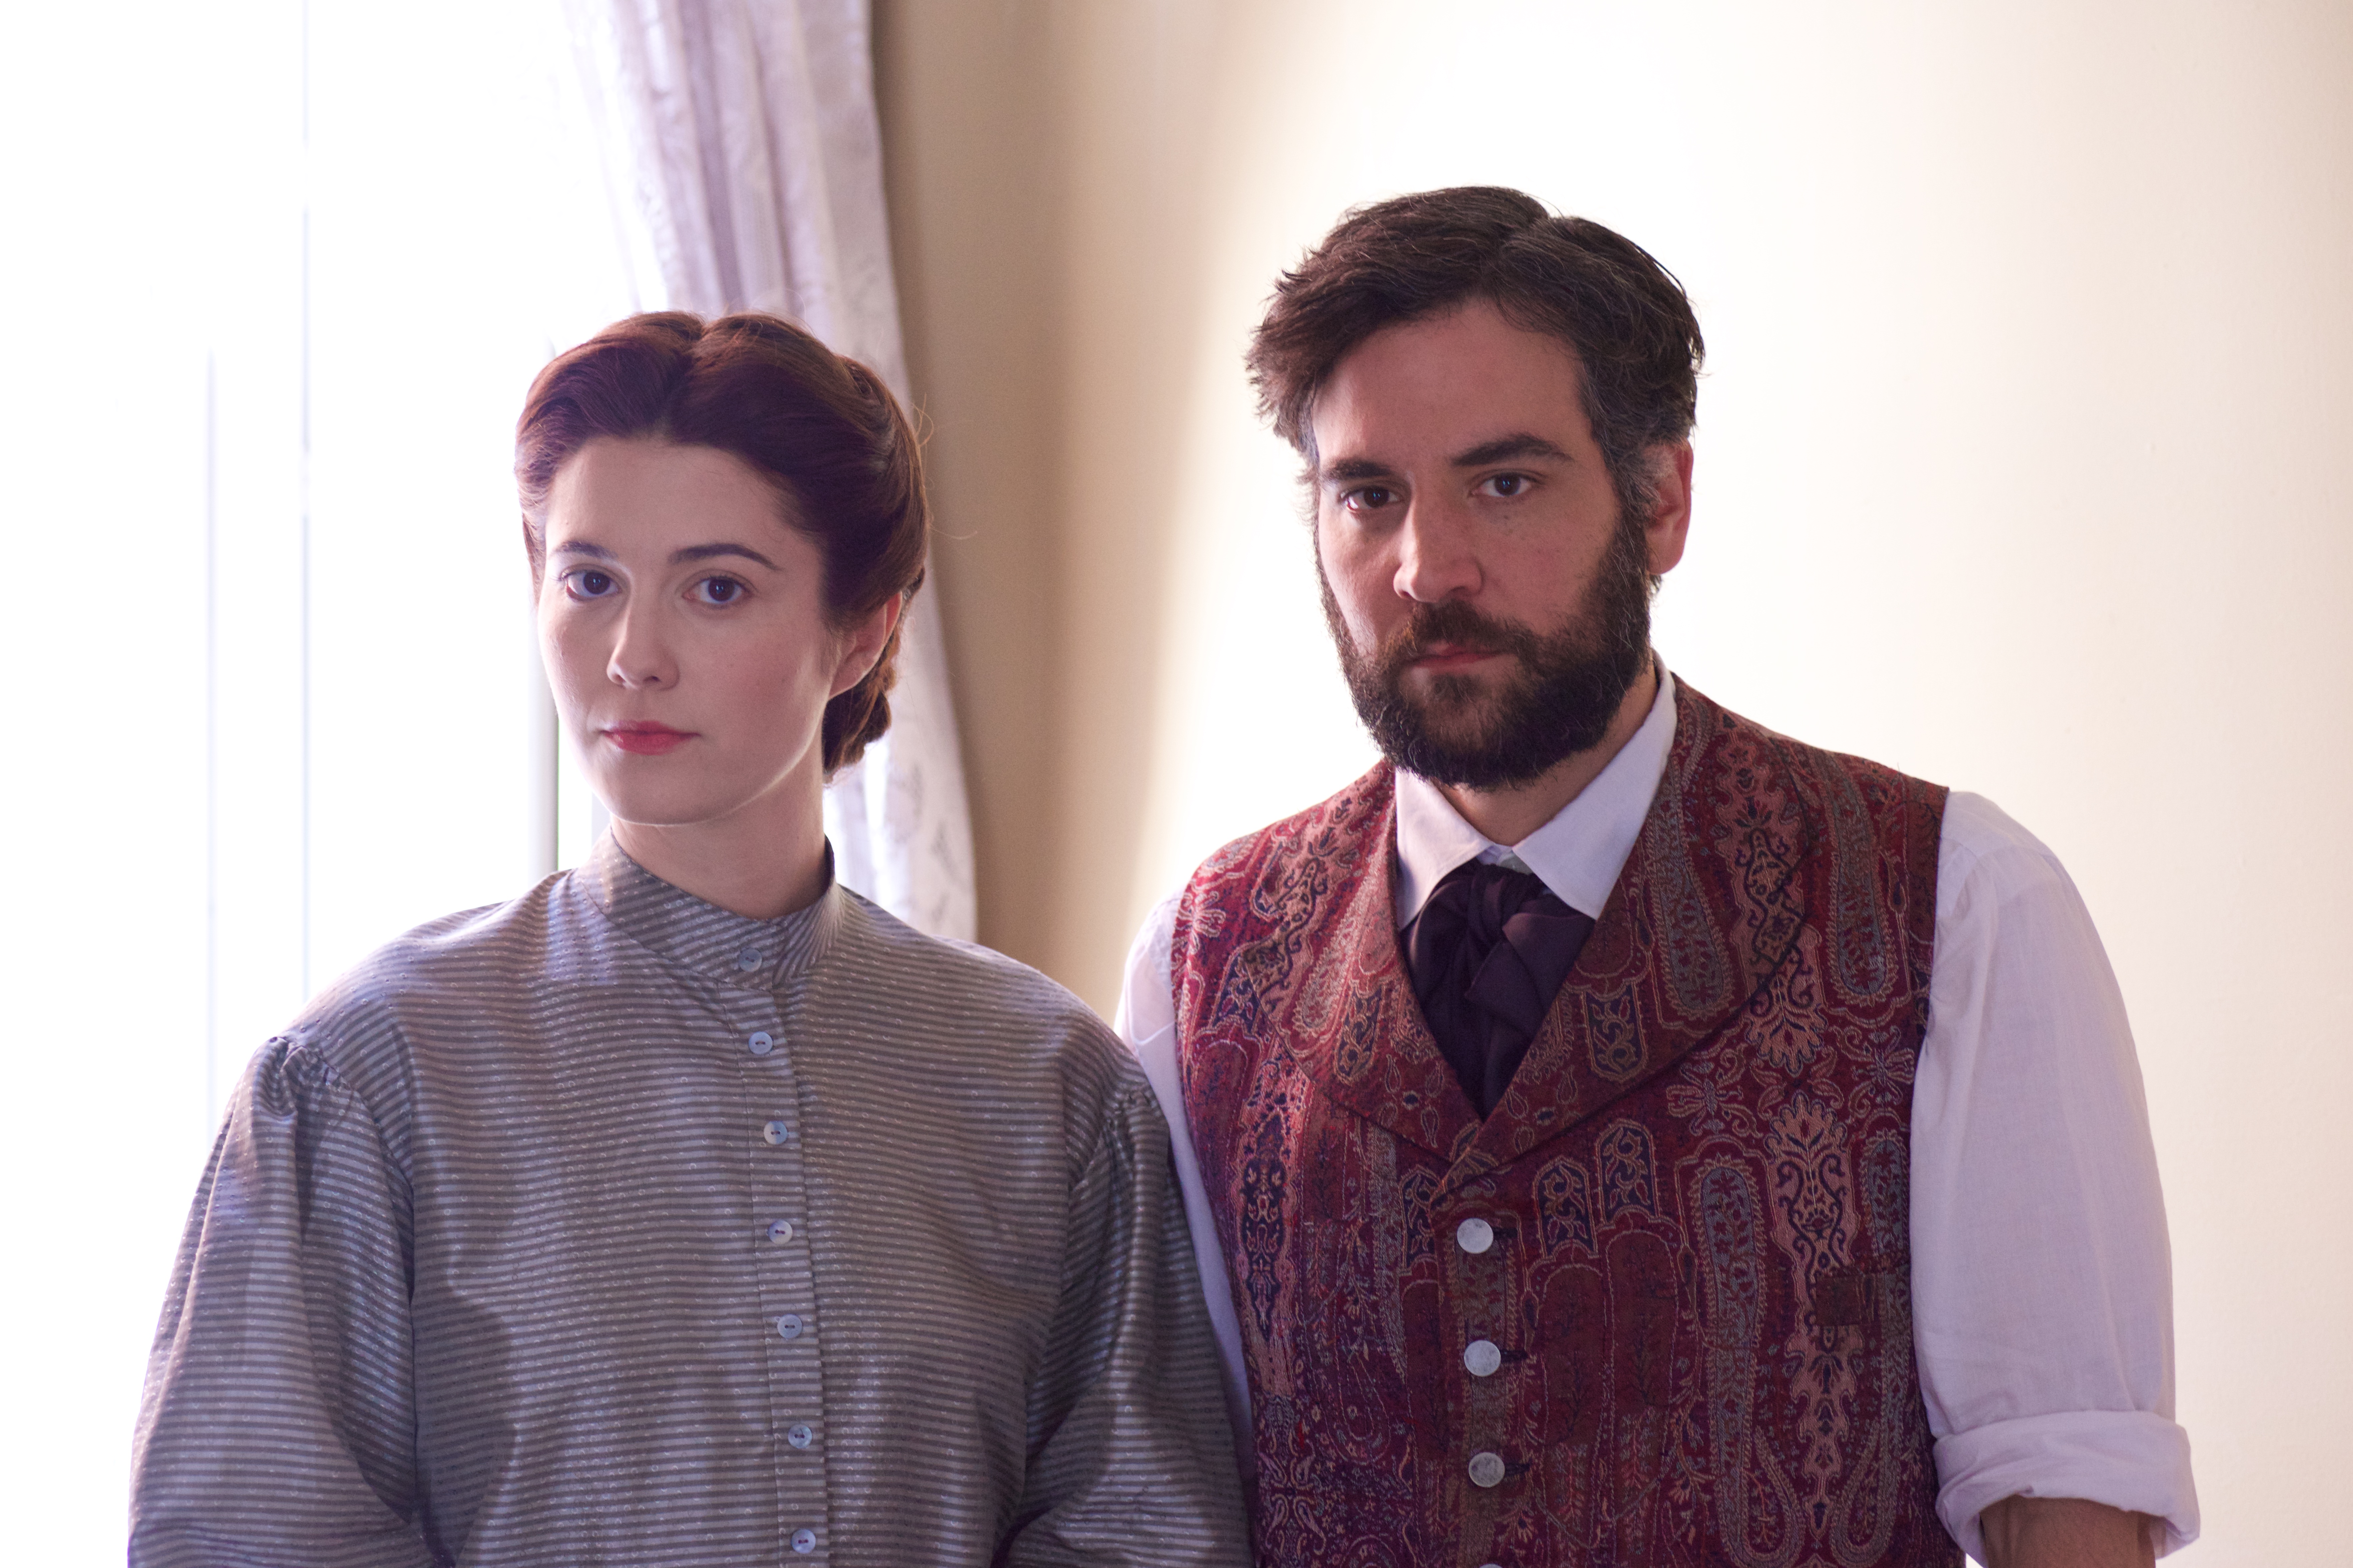 Mary Elizabeth Winstead as Nurse Phinney and Josh Radnor as Dr. Foster in the new PBS Drama Mercy Street.